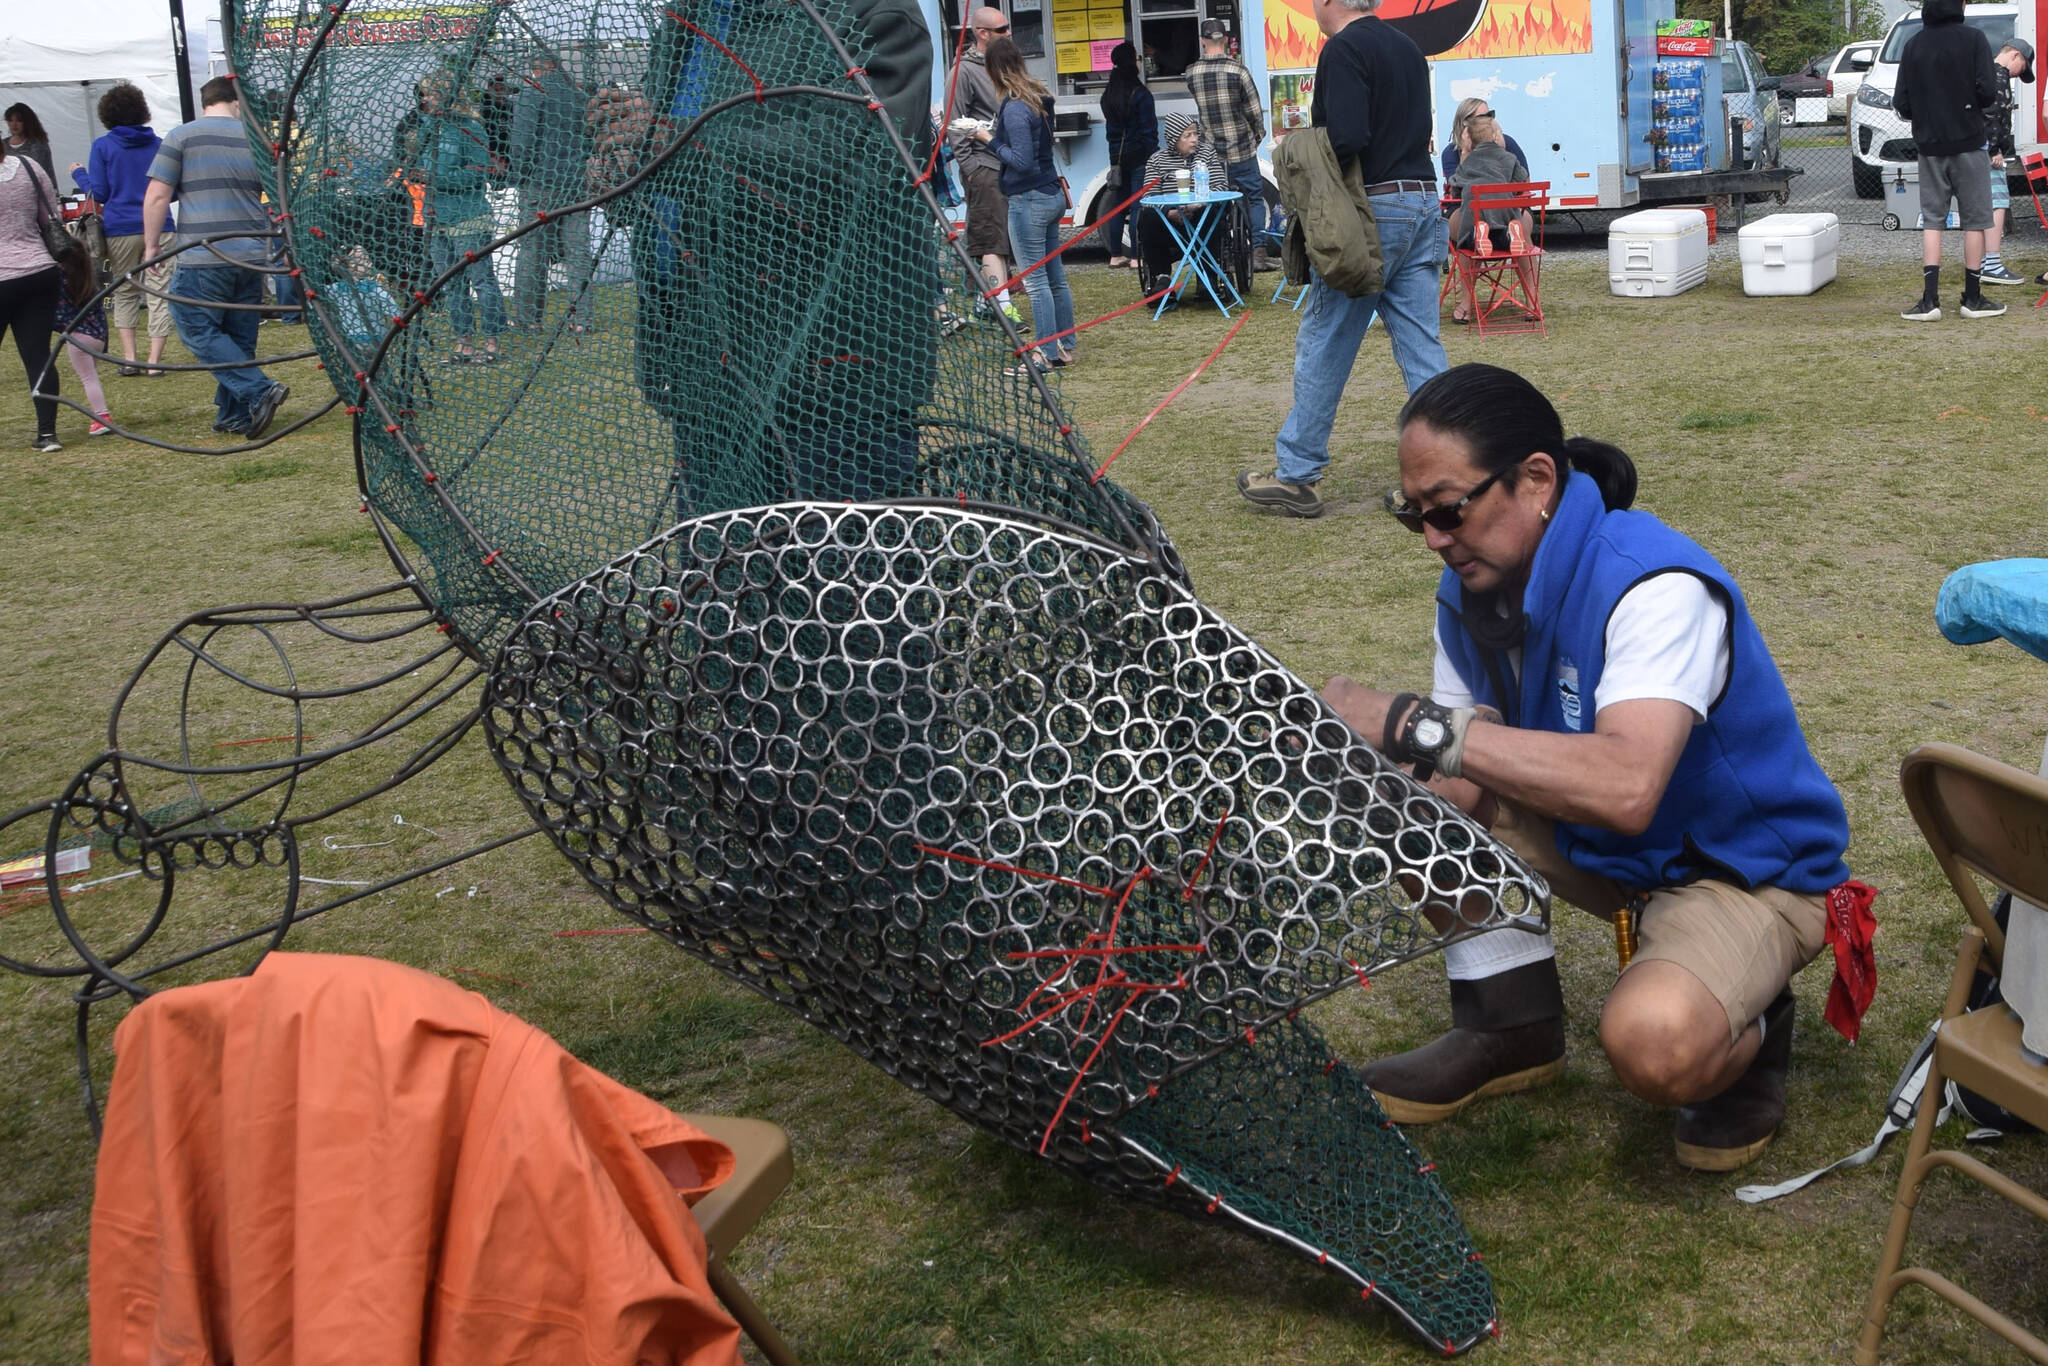 Cam Choy, associate professor of art at Kenai Peninsula College, works on a salmon sculpture in collaboration with the Kenai Watershed Forum during the Kenai River Festival at Soldotna Creek Park in Soldotna, Alaska on June 8, 2019. (Peninsula Clarion file)